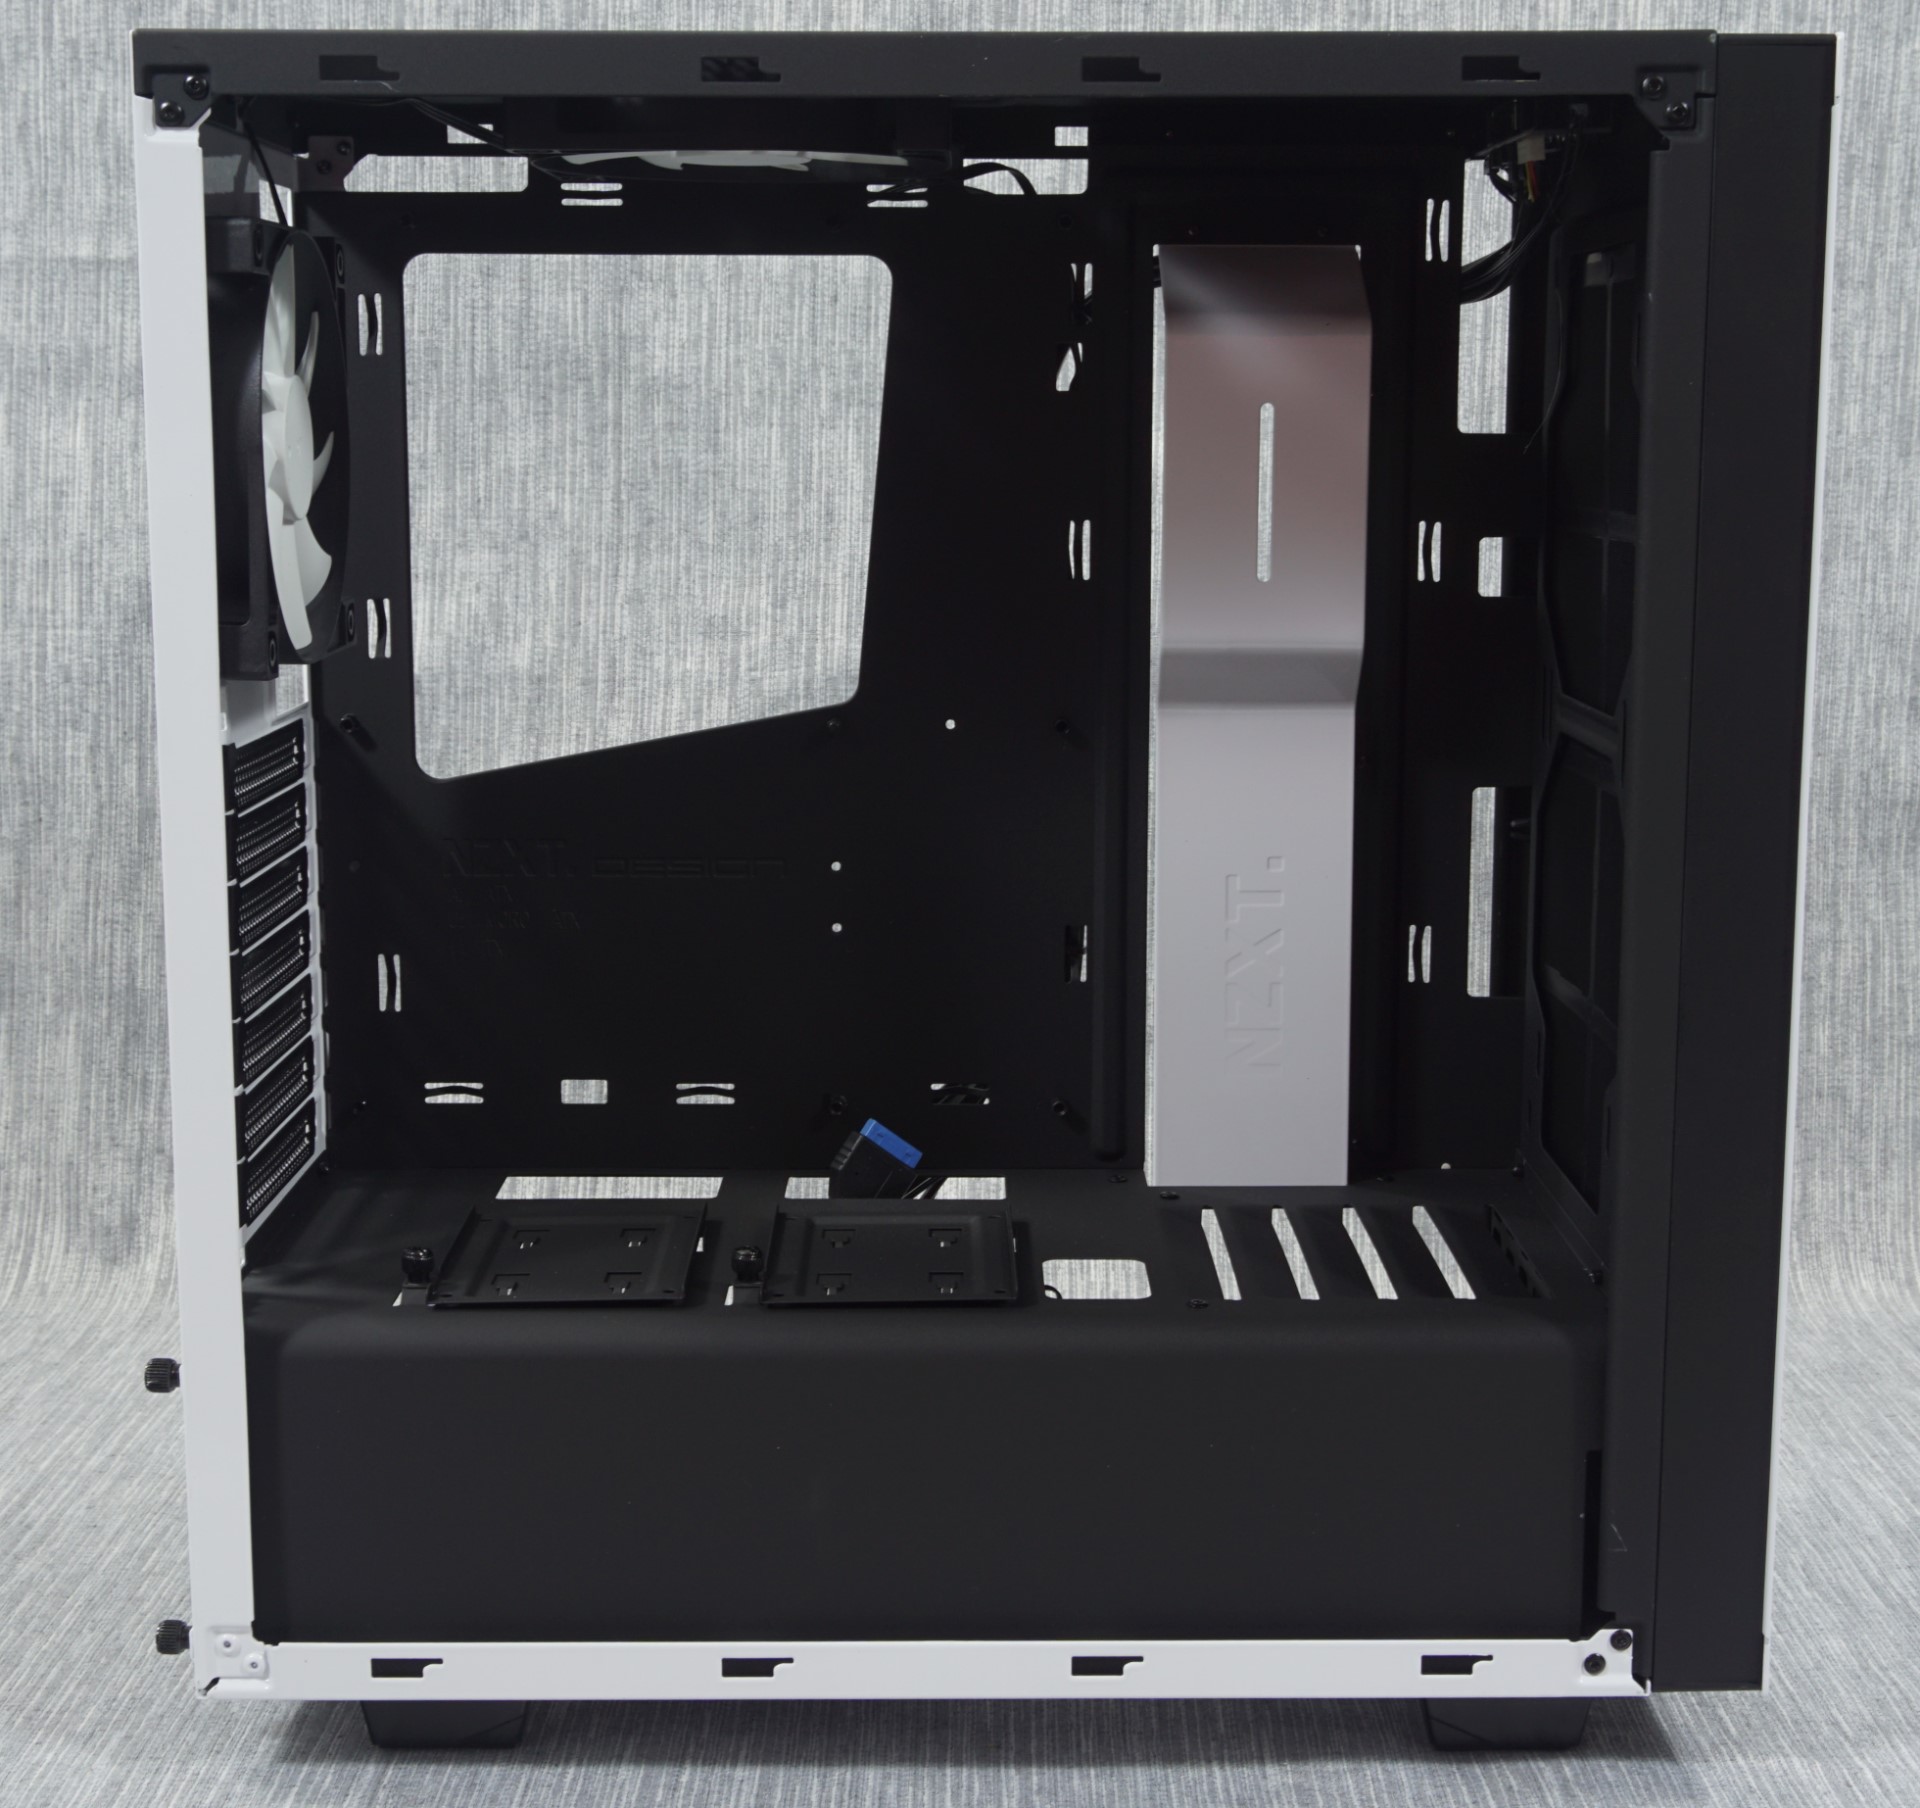 The Interior of the NZXT - The NZXT S340 Case Review